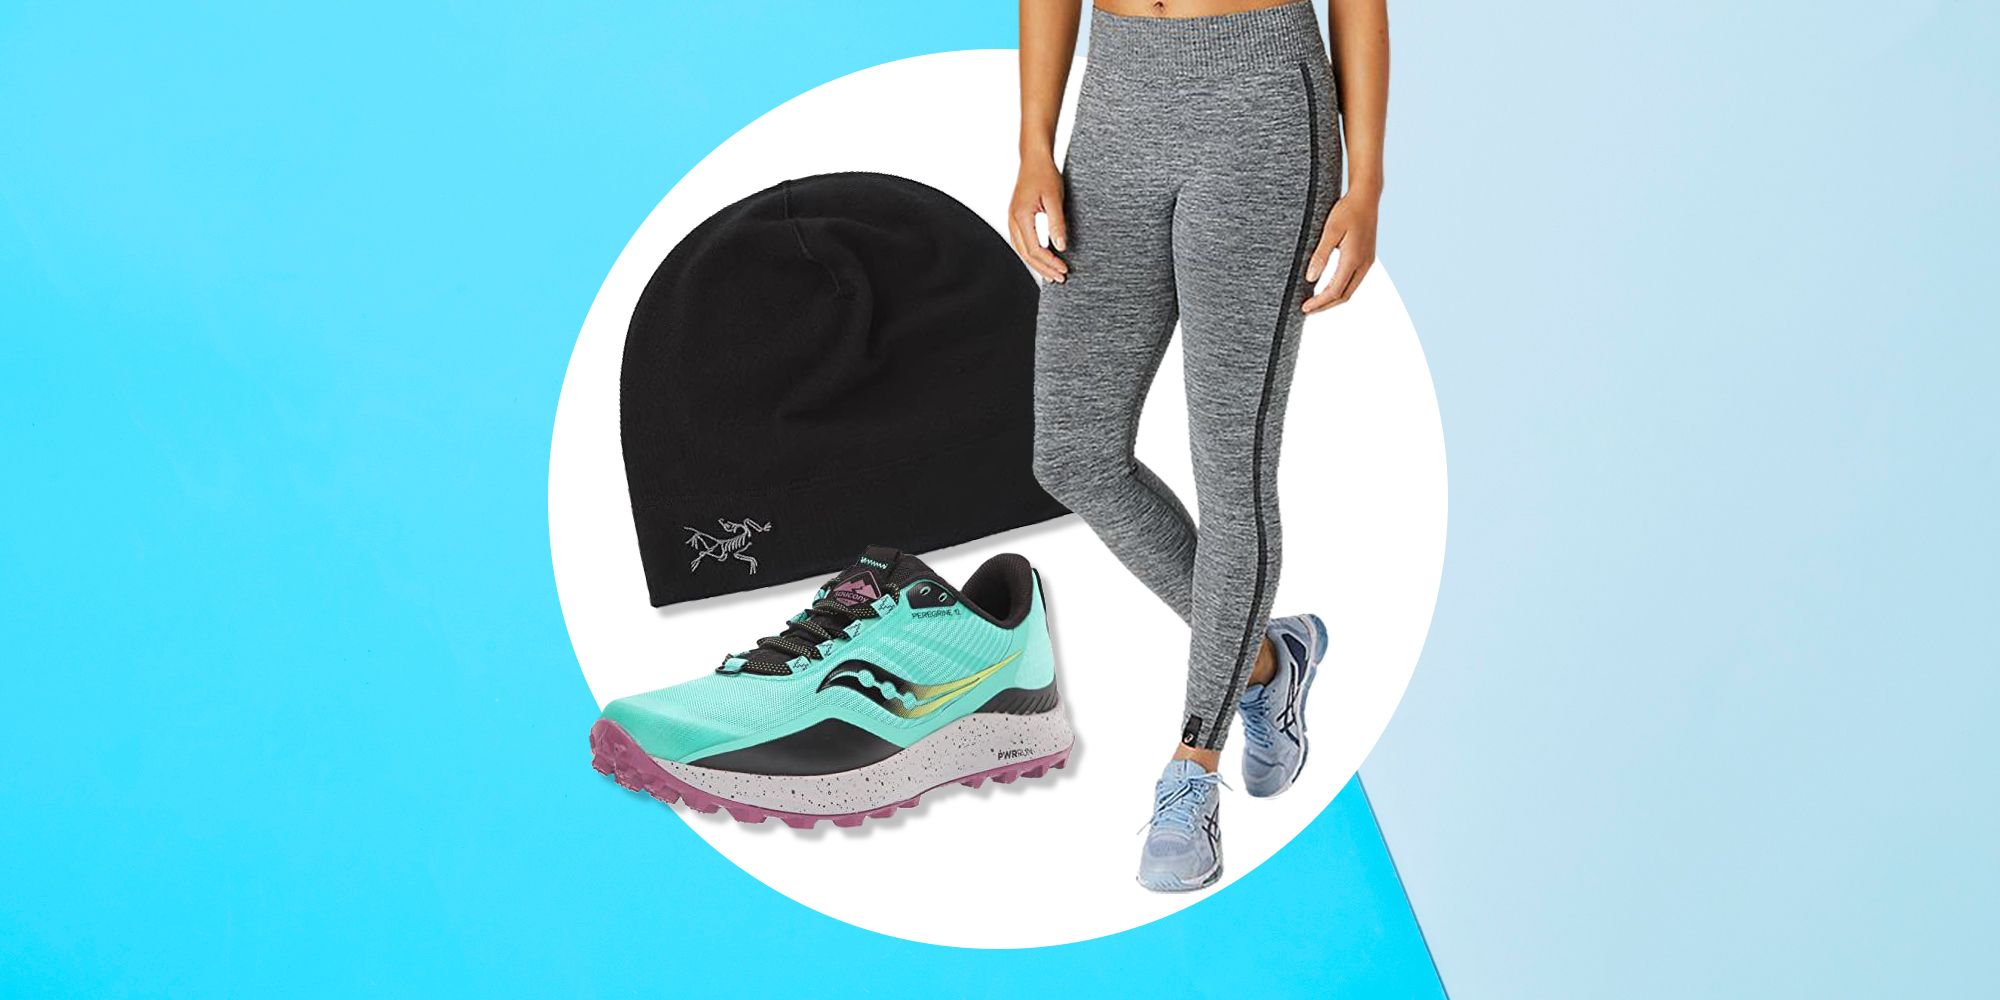 What to Wear for ColdWeather Workouts